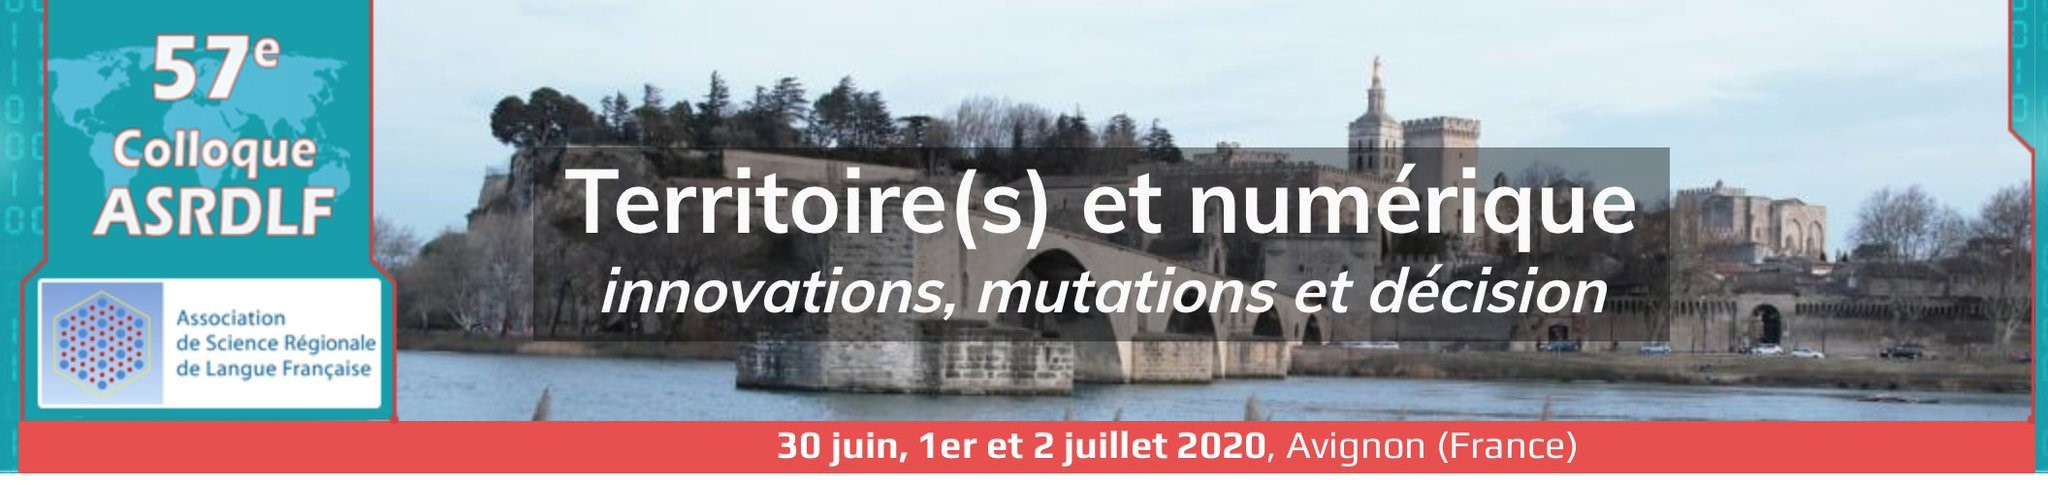 French Speaking Section 57th ASRDLF Colloquium